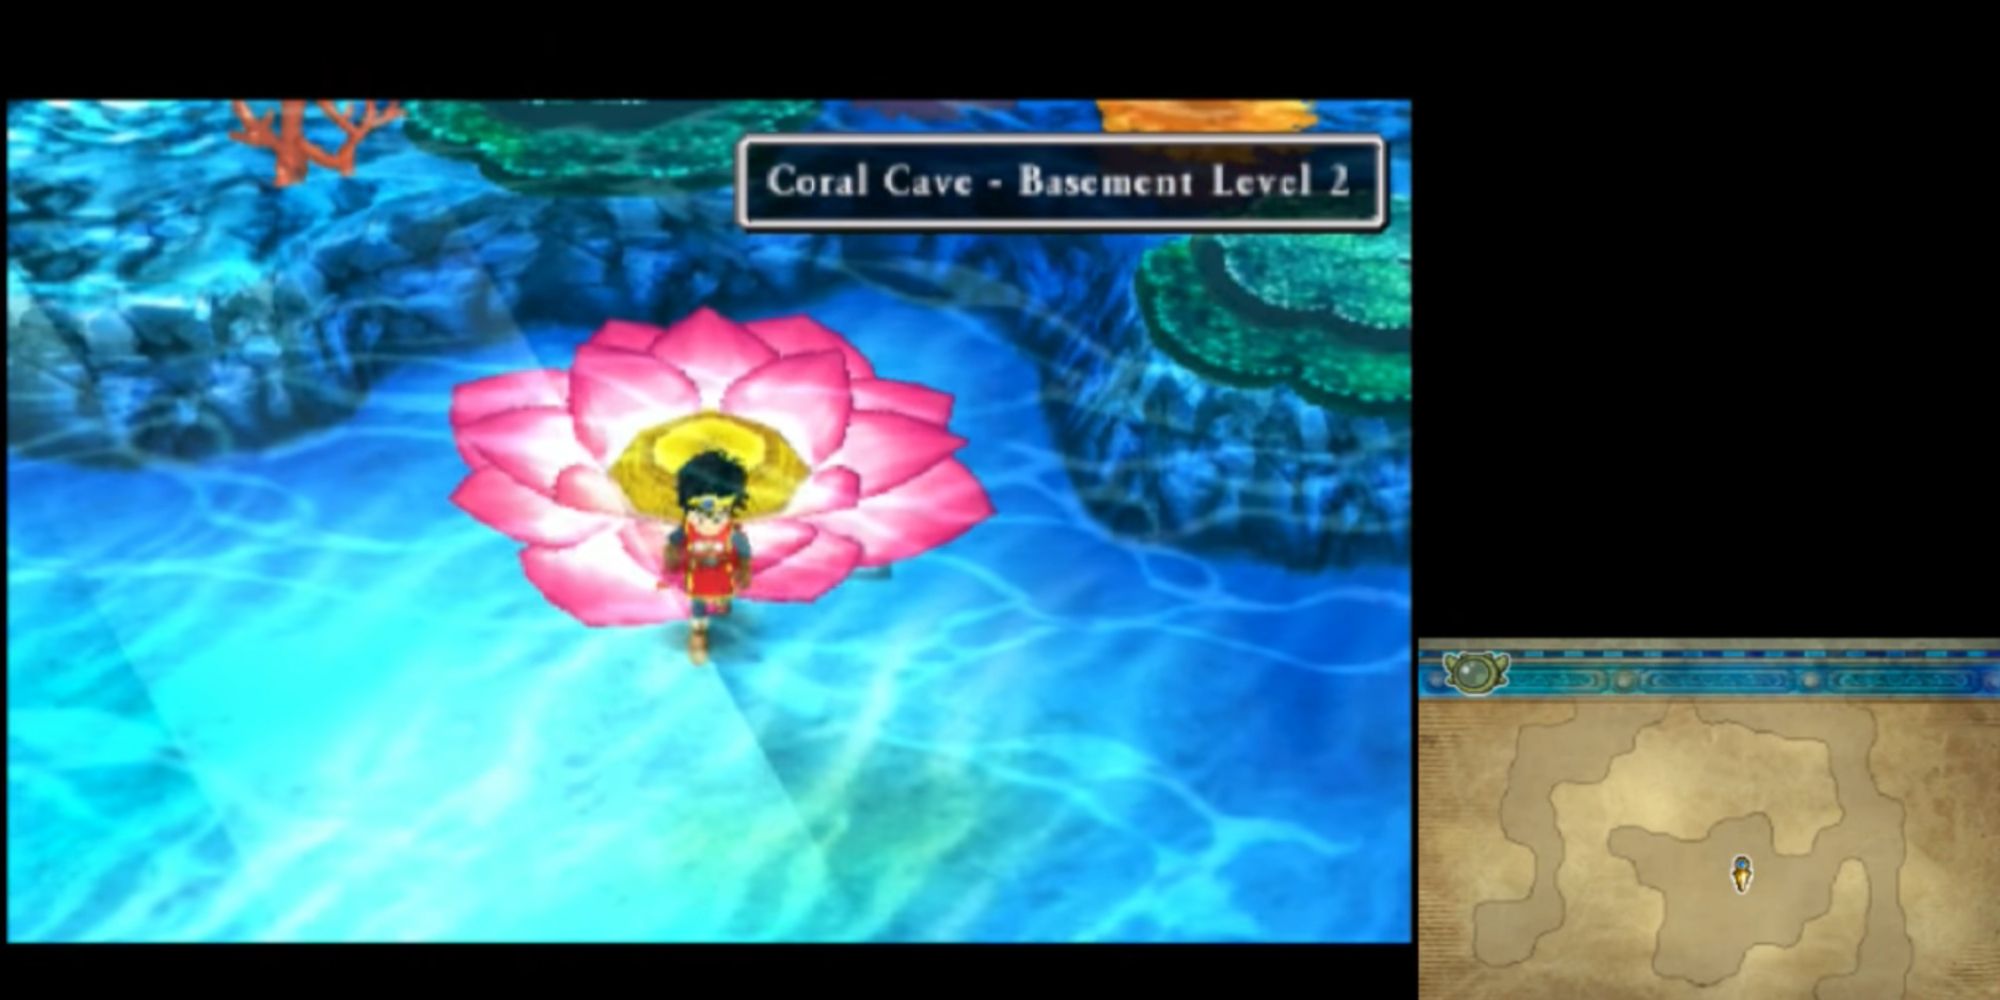 Dragon Quest Hero in Coral Cave on top of large lotus flower and surrounded by water with map in bottom right